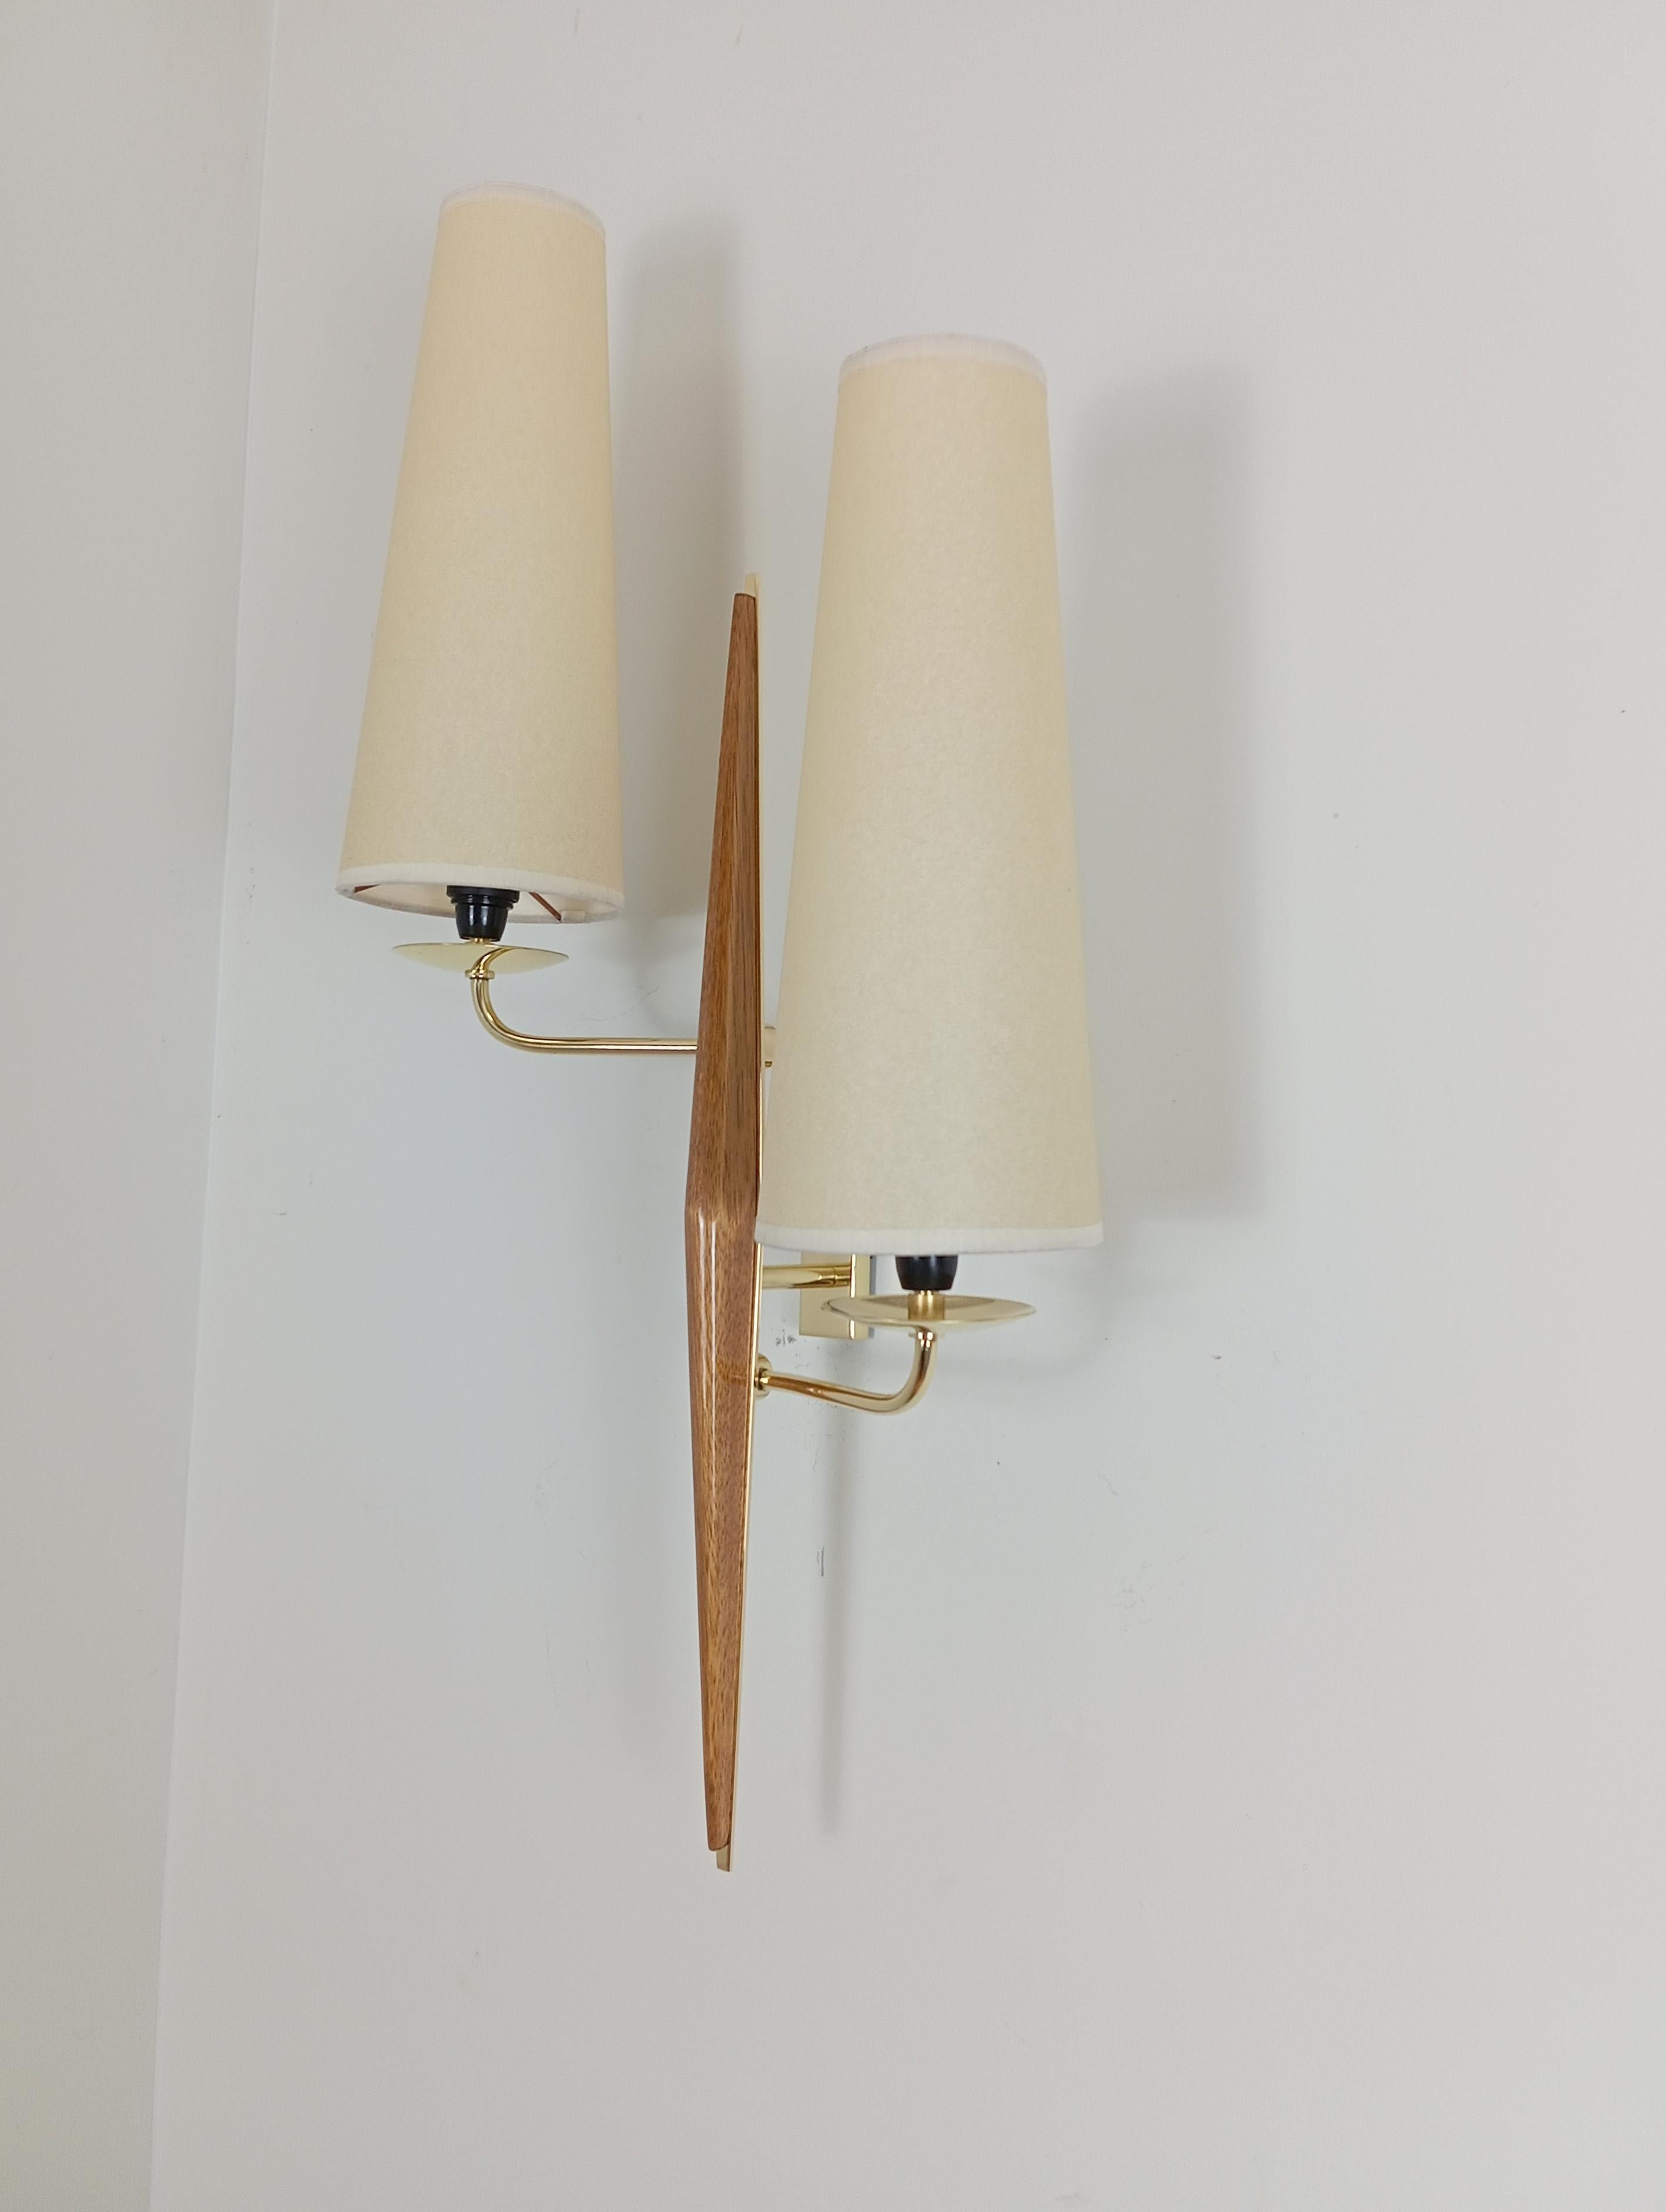 French Pair of double sconces in brass and teak wood, Maison Lunel circa 1950